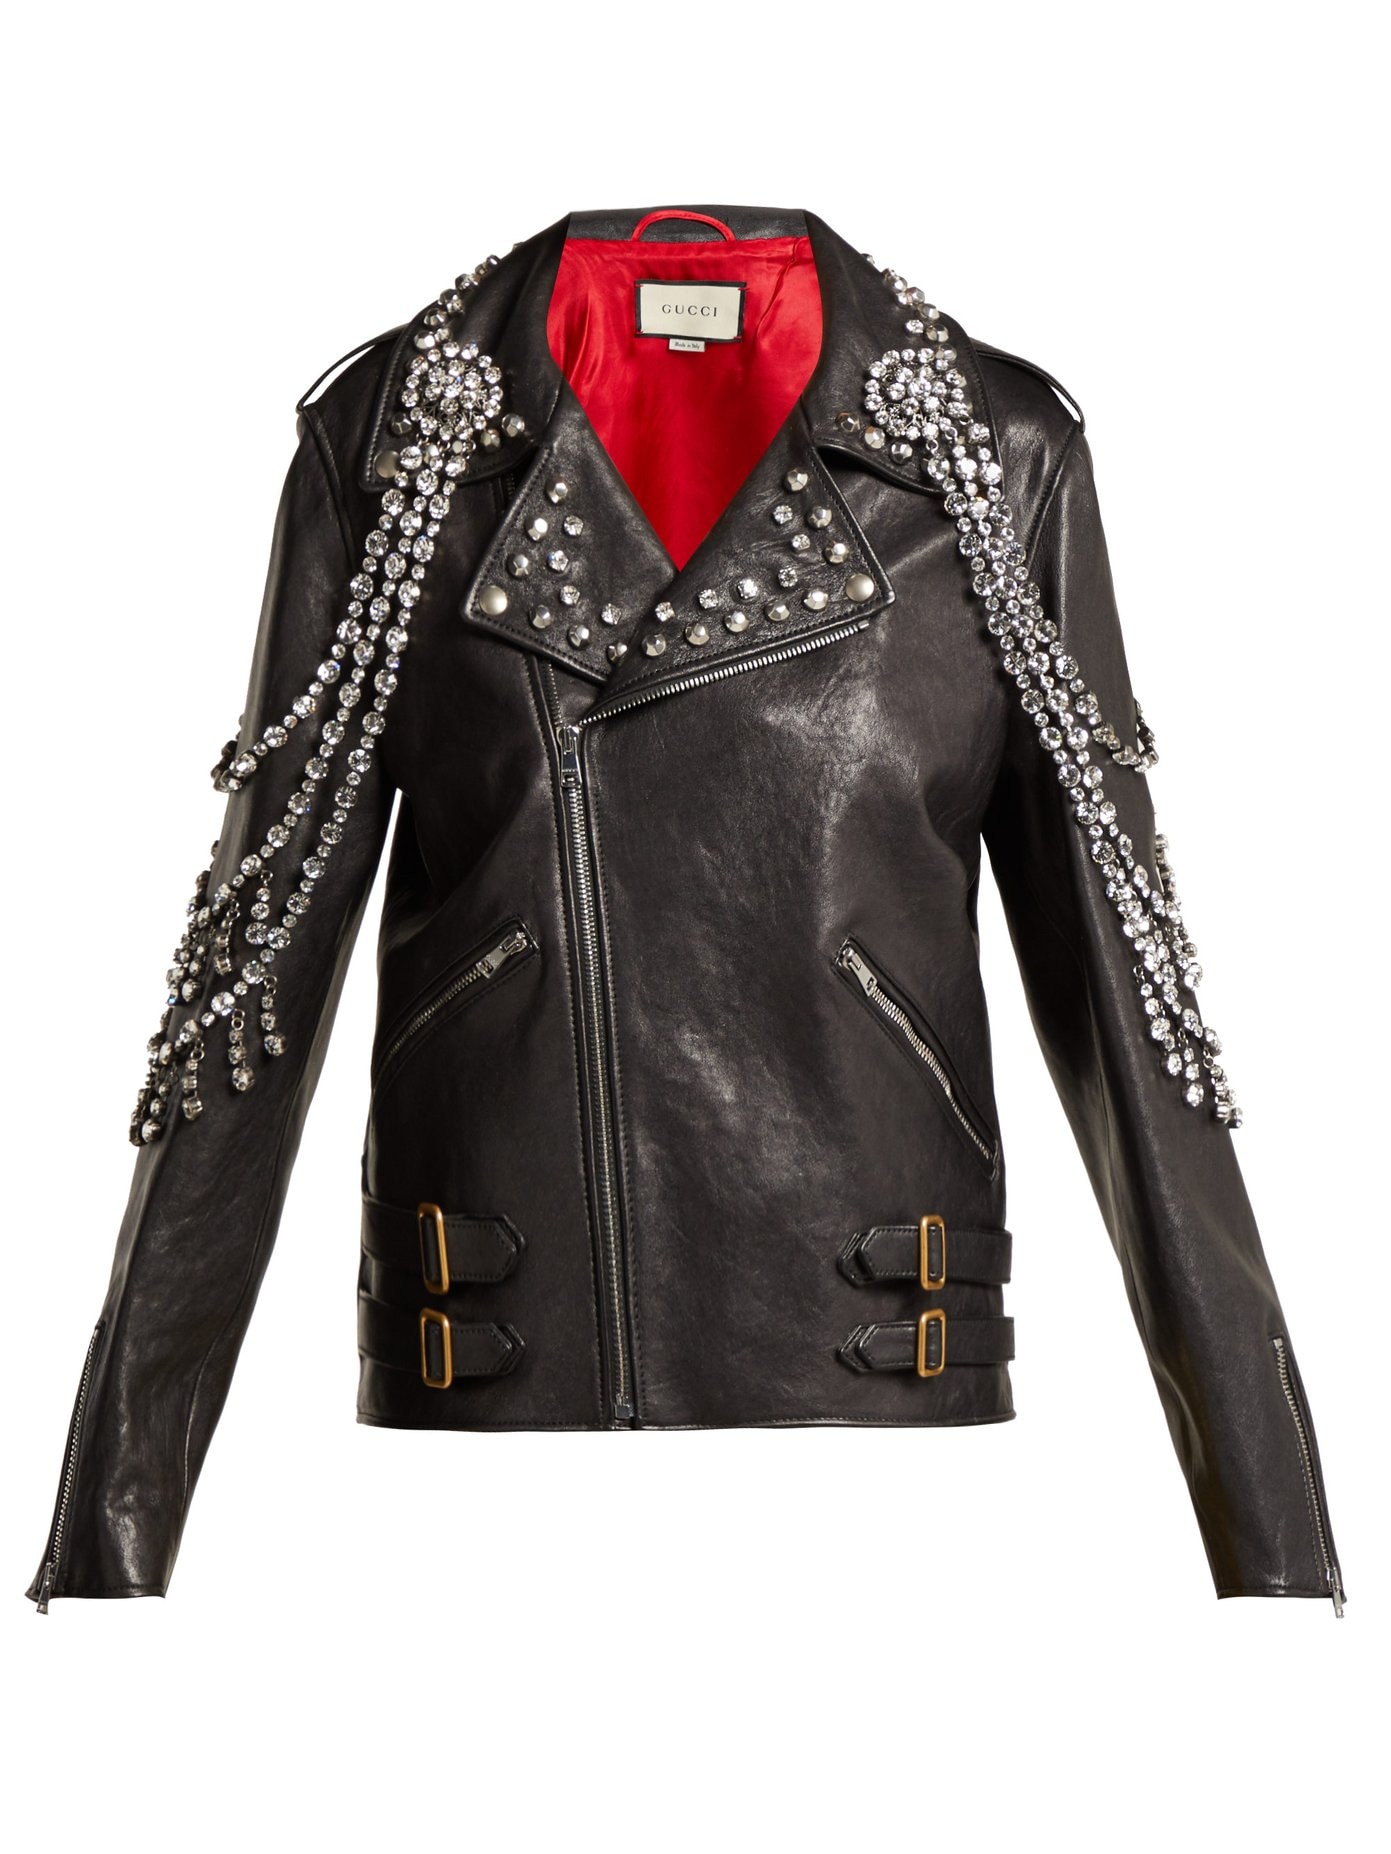 Yankees crystal-embellished leather biker jacket, Gucci from All The ...